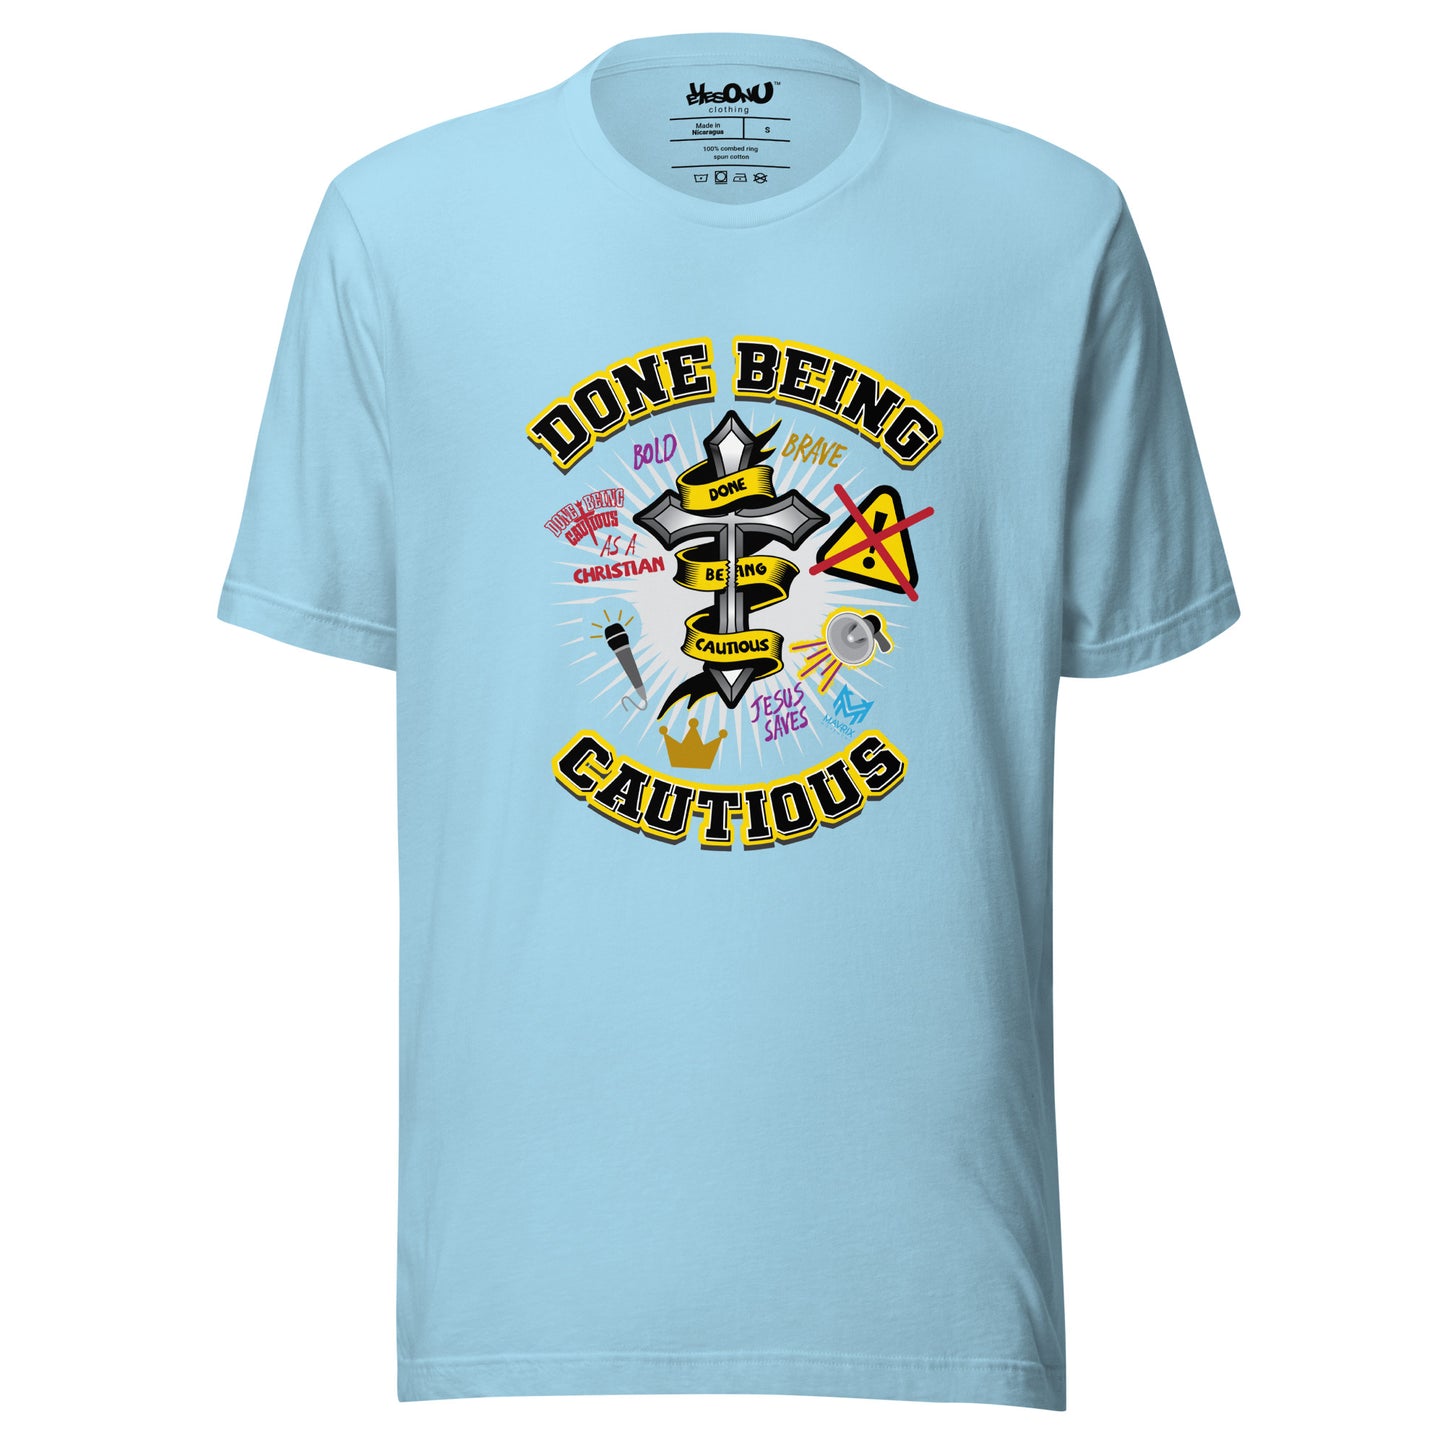 Done Being Cautious - Cross T-shirt (6 colors)